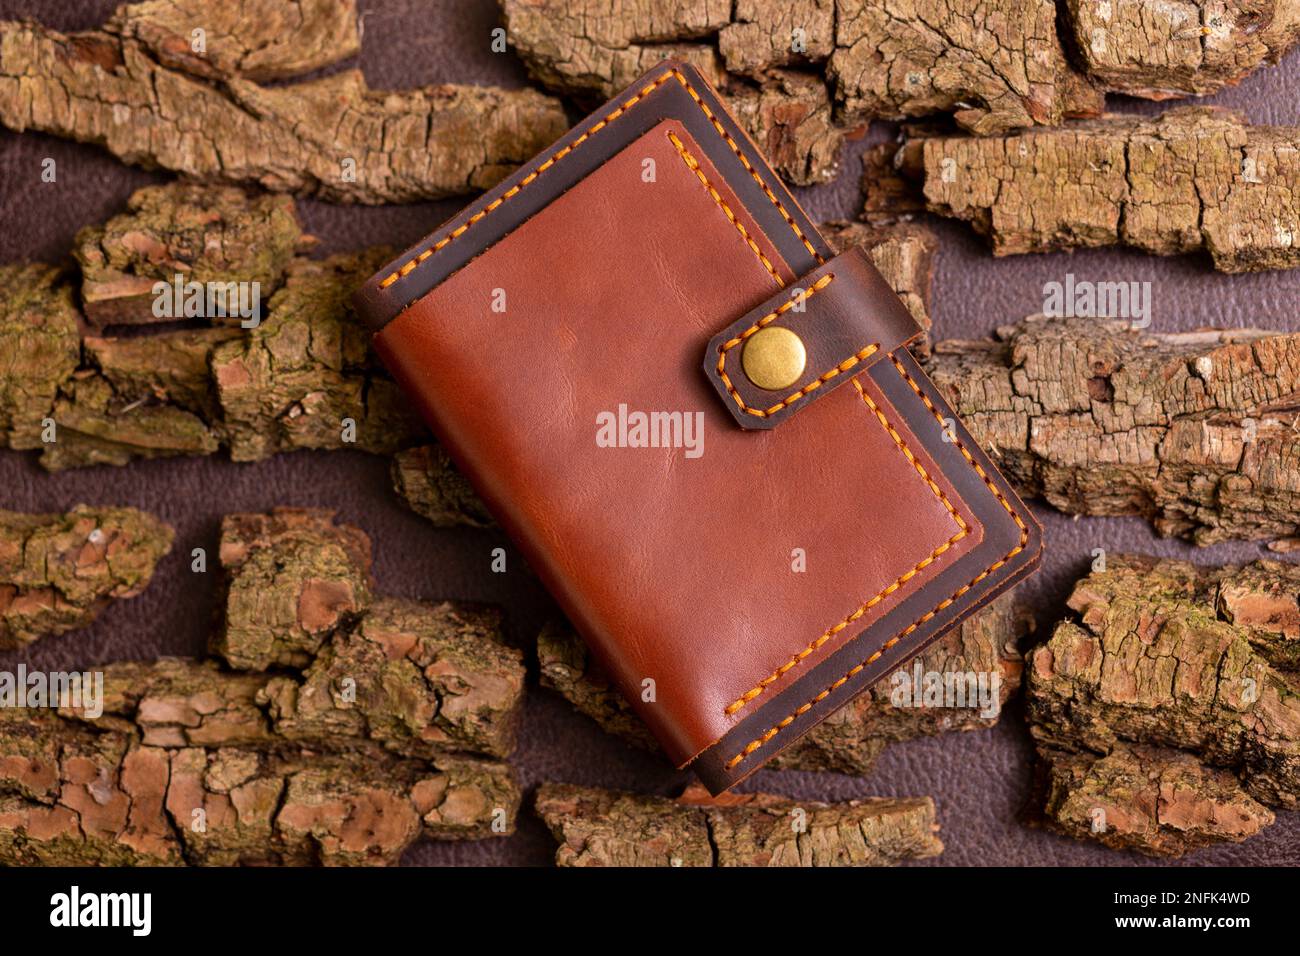 Closed brown mens wallet with money and credit cards on leather background with pine bark. Stock Photo